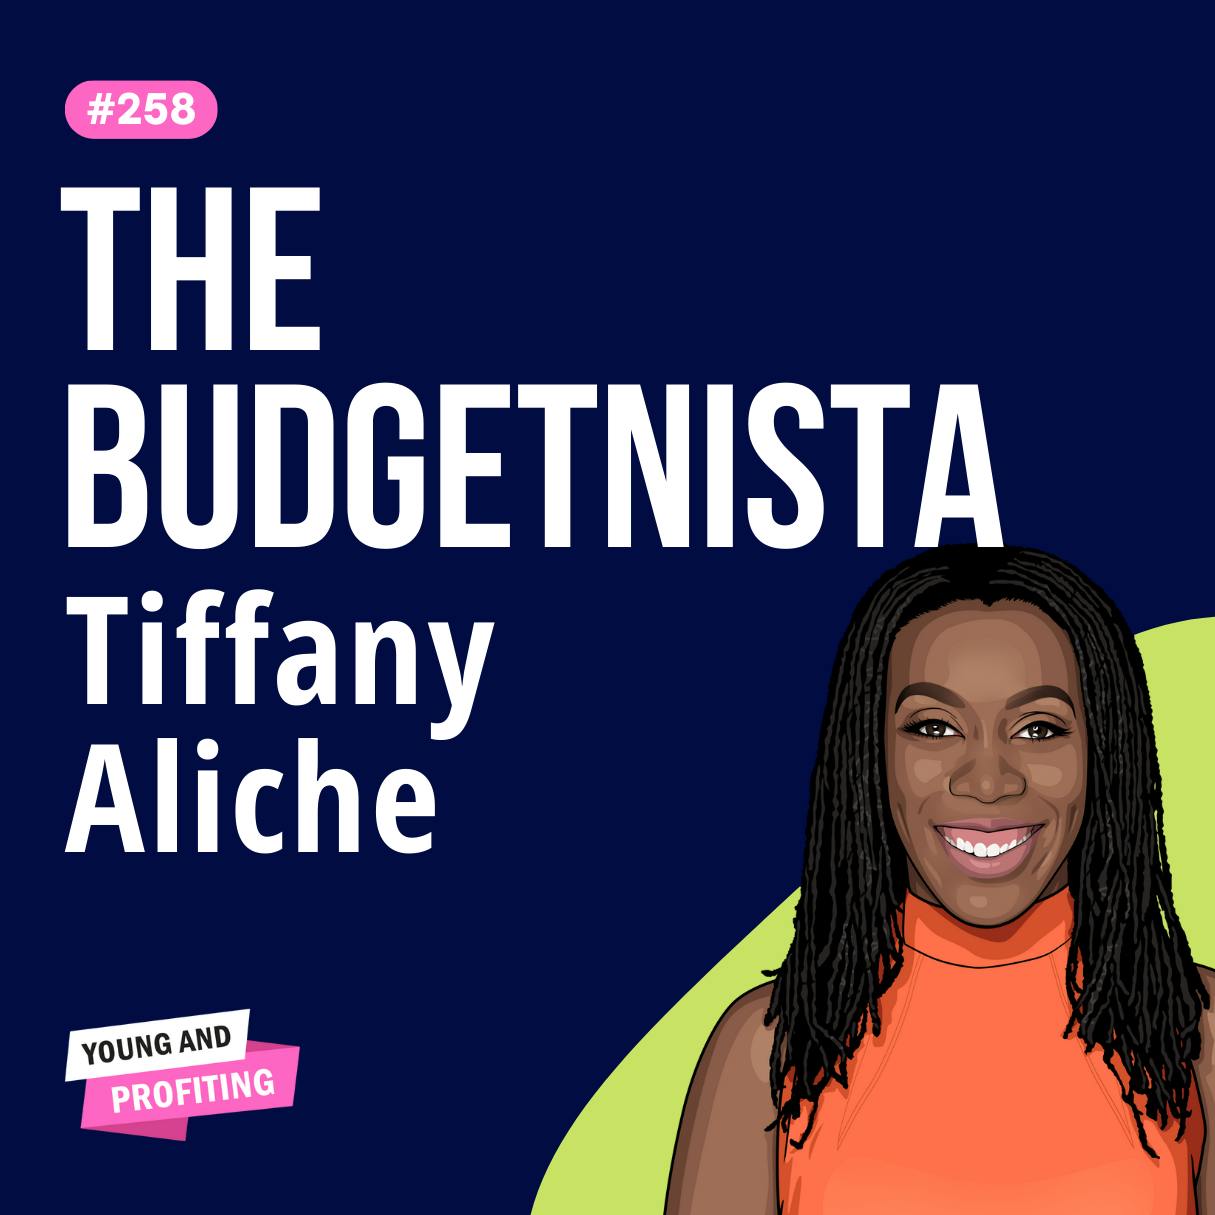 Tiffany "The Budgetnista" Aliche: Financial Wholeness, The Financial Freedom That's Accessible For Everyone | E258